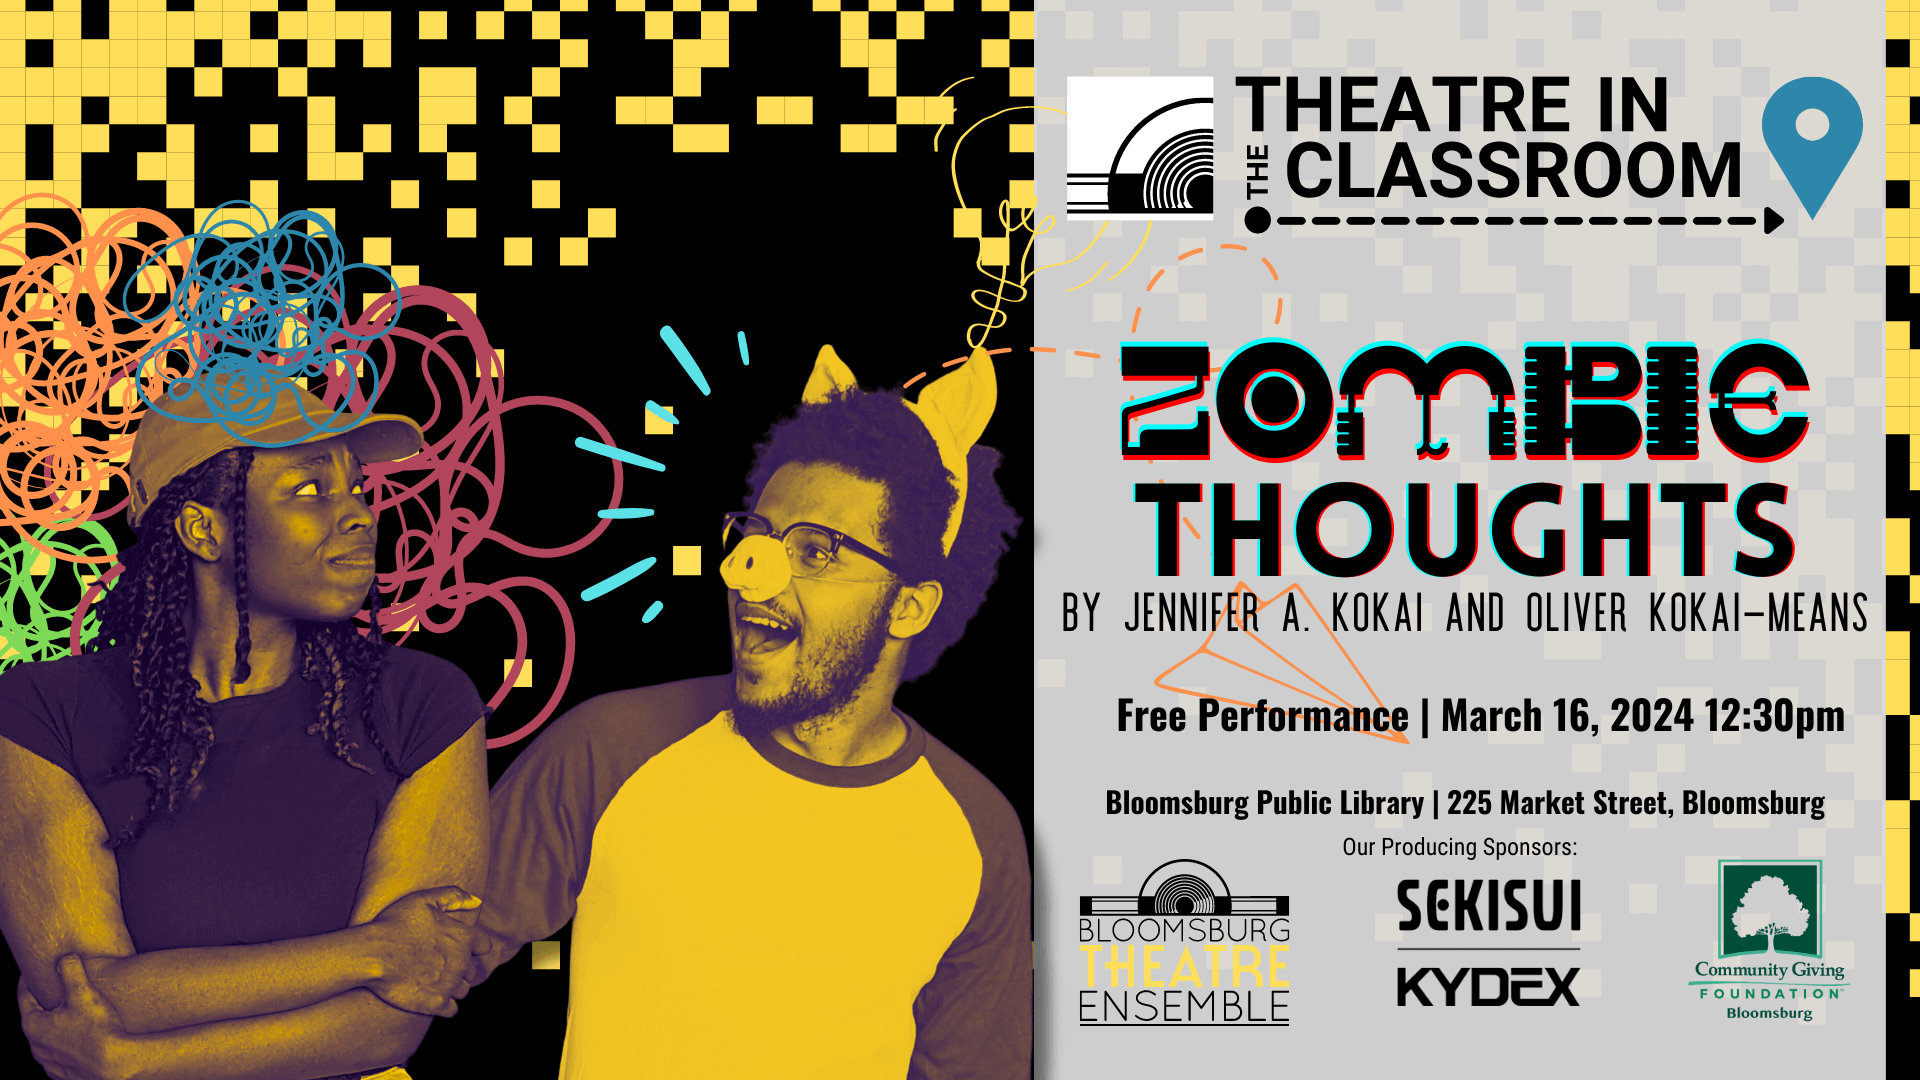 BTE's Theatre in the Classroom - Zombie Thoughts - Info in description